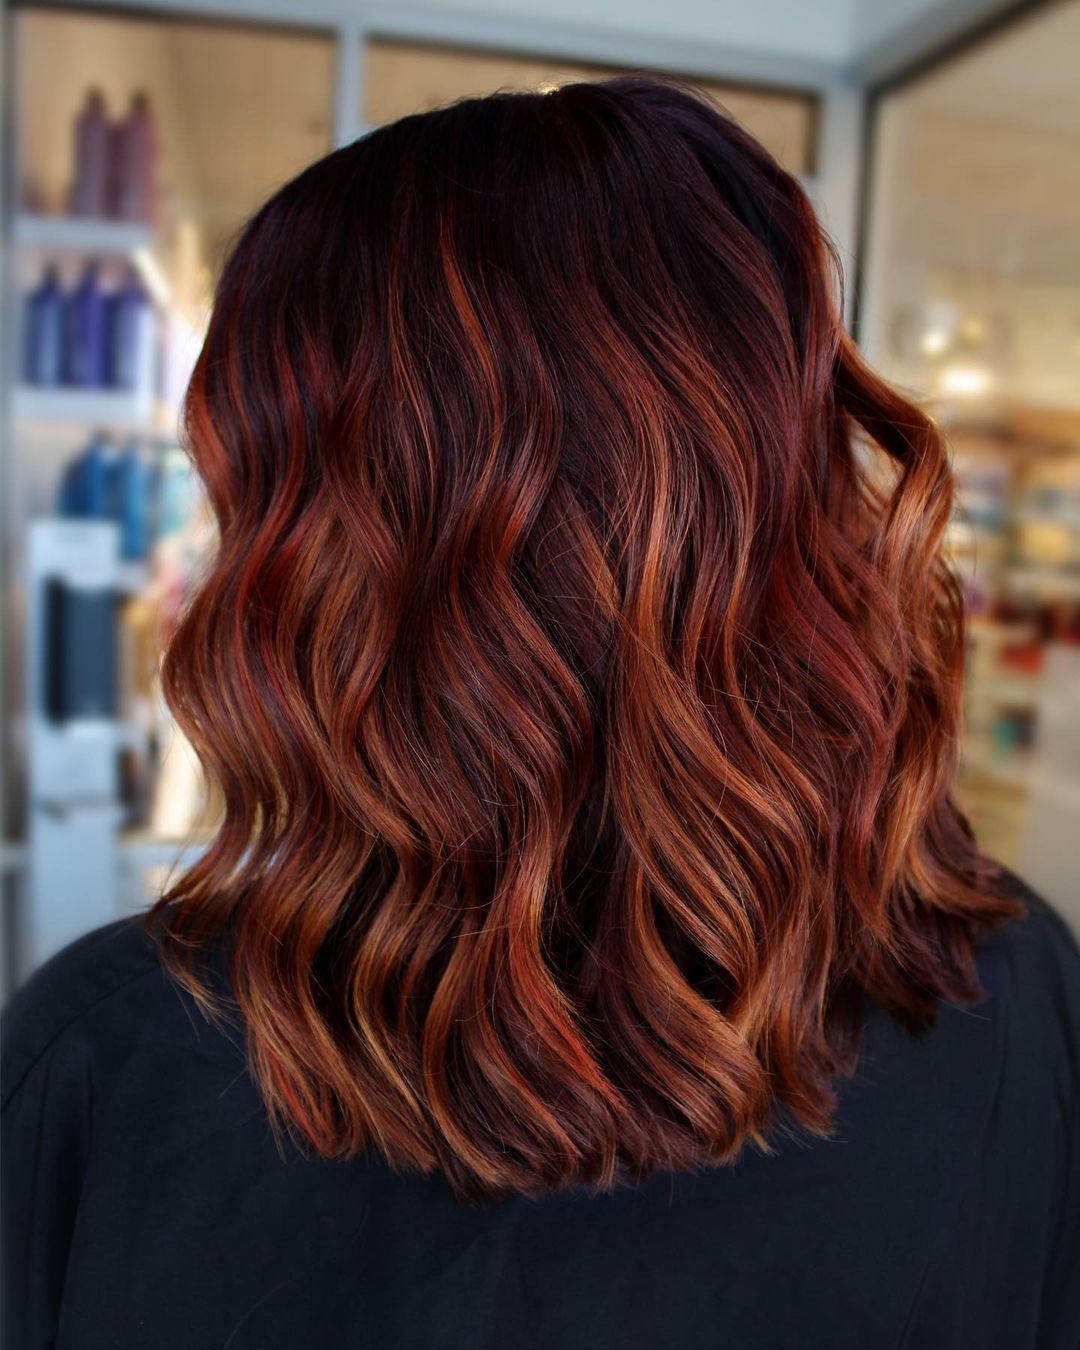 Medium Length Brown Hair With Red Highlights